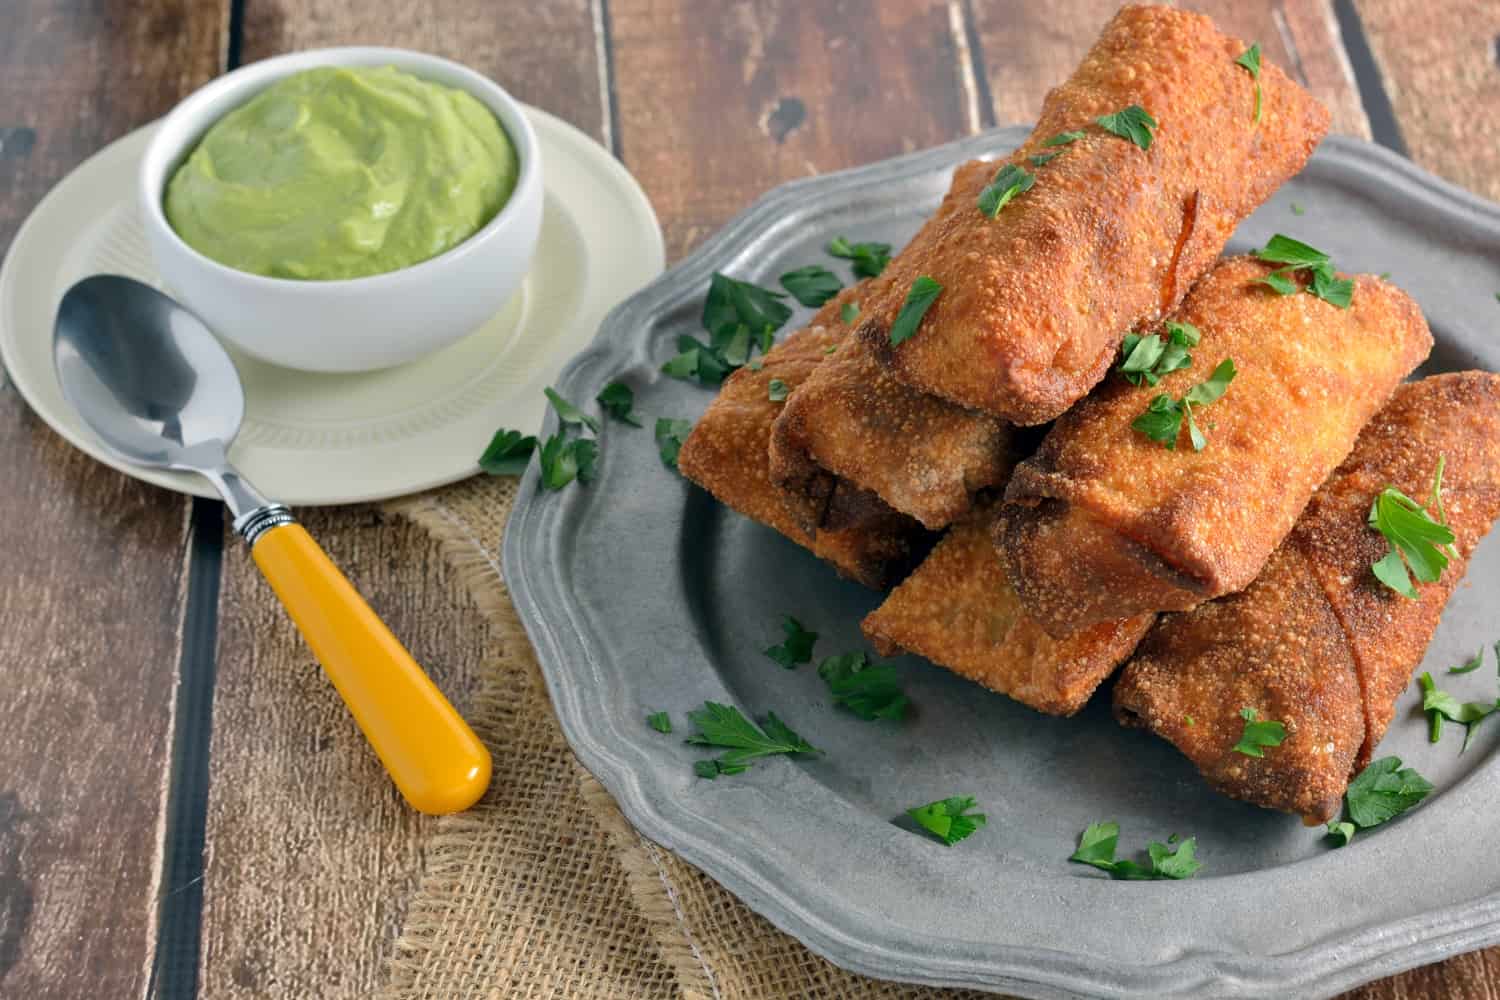 Pulled Pork and Smoked Gouda Egg Rolls Recipe - Succulent, sweet and zesty pulled pork wrapped in a crispy egg roll with silky smoked gouda cheese and served alongside Avocado Green Goddess Dressing. 